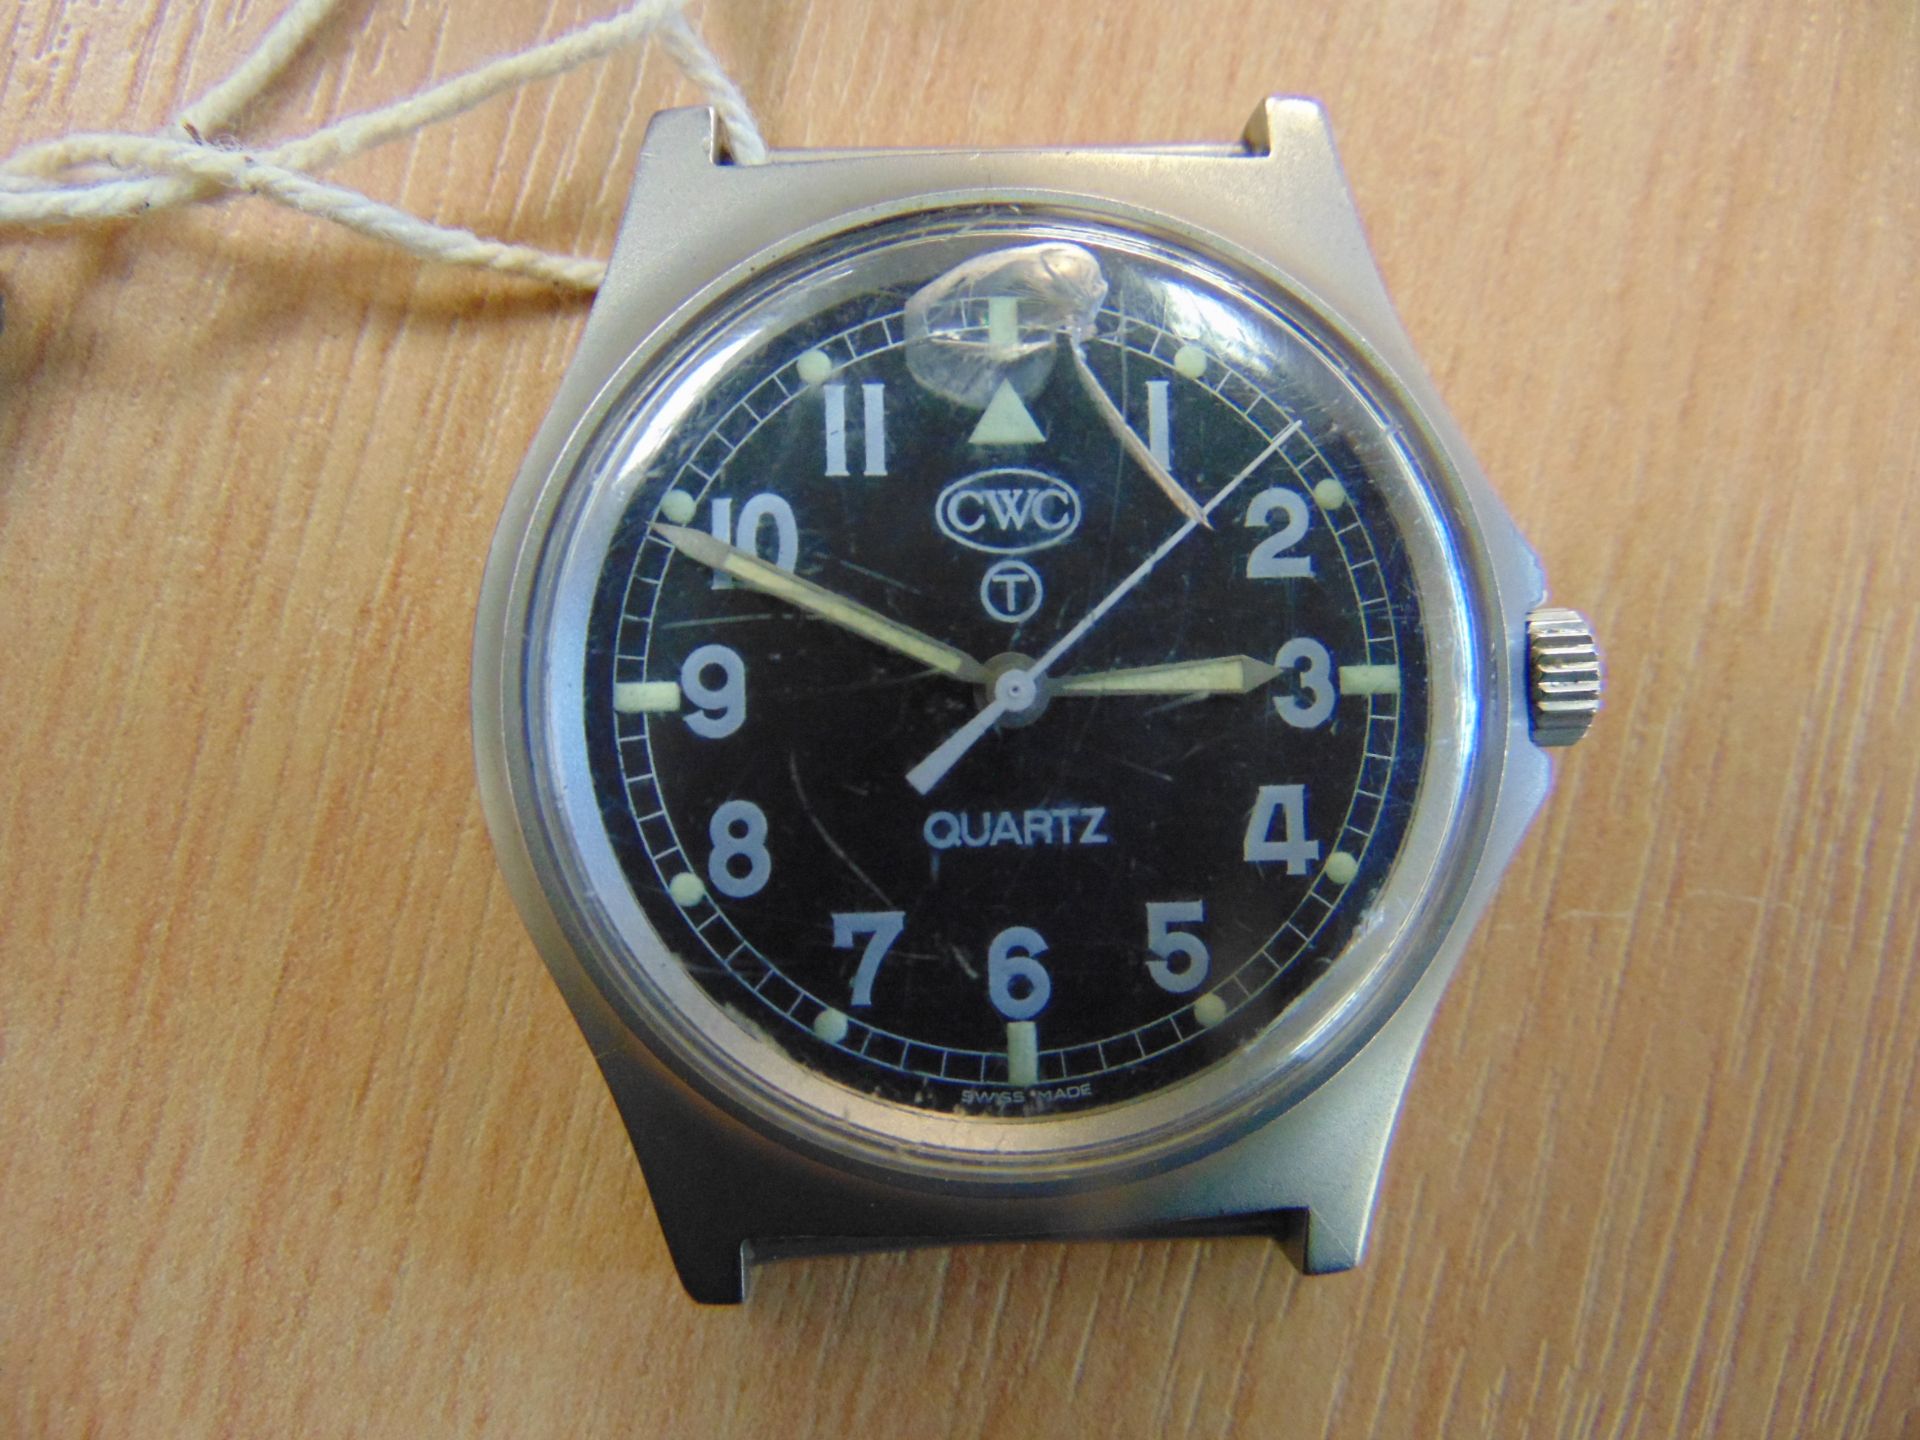 2X CWC 0552 ROYAL MARINES ISSUE SERVICE WATCHES NATO MARKED DATED 1990 - Image 4 of 8